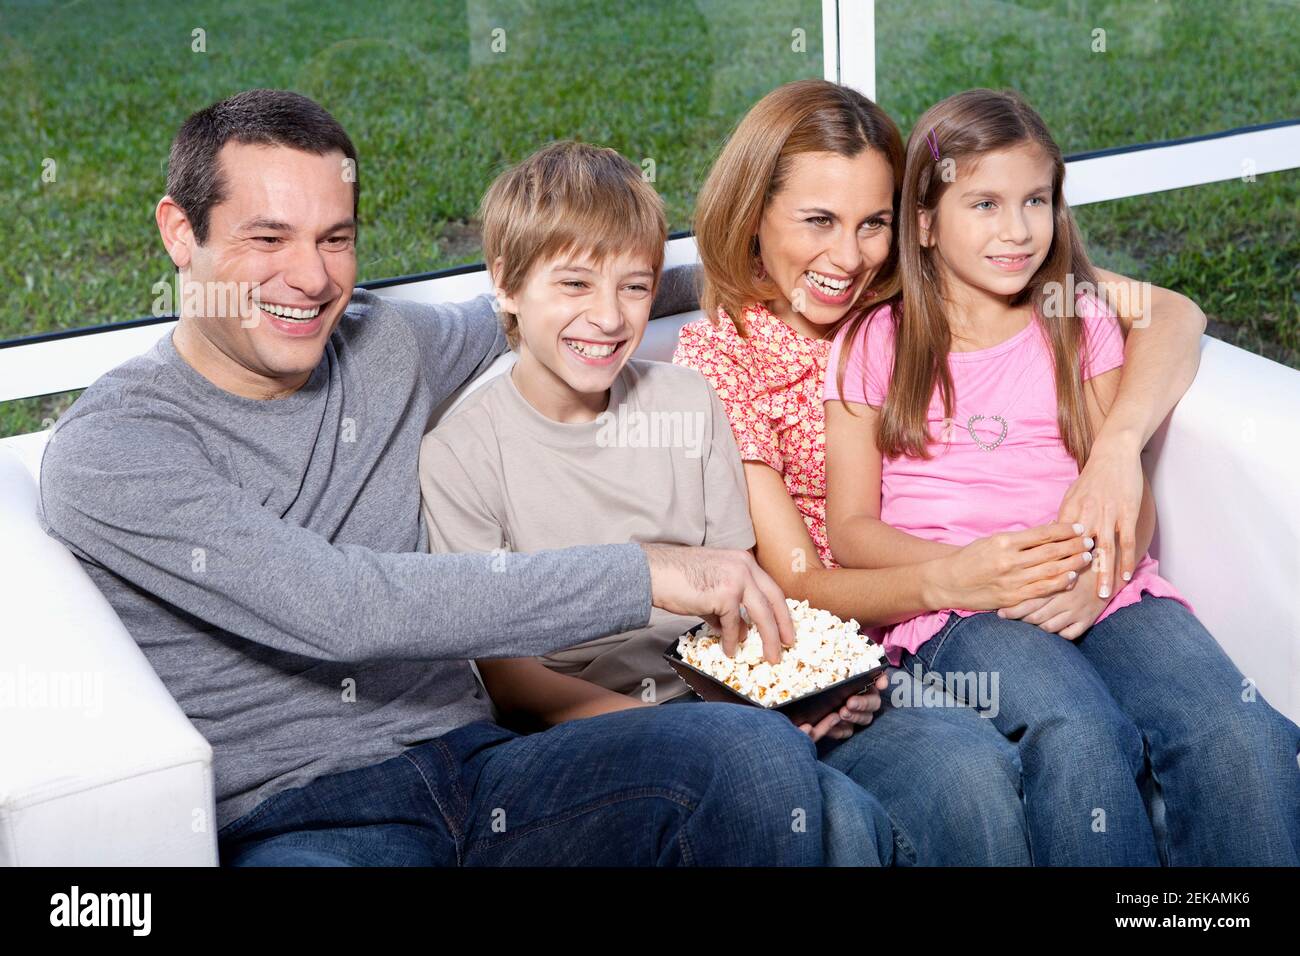 Family sitting on a couch Stock Photo